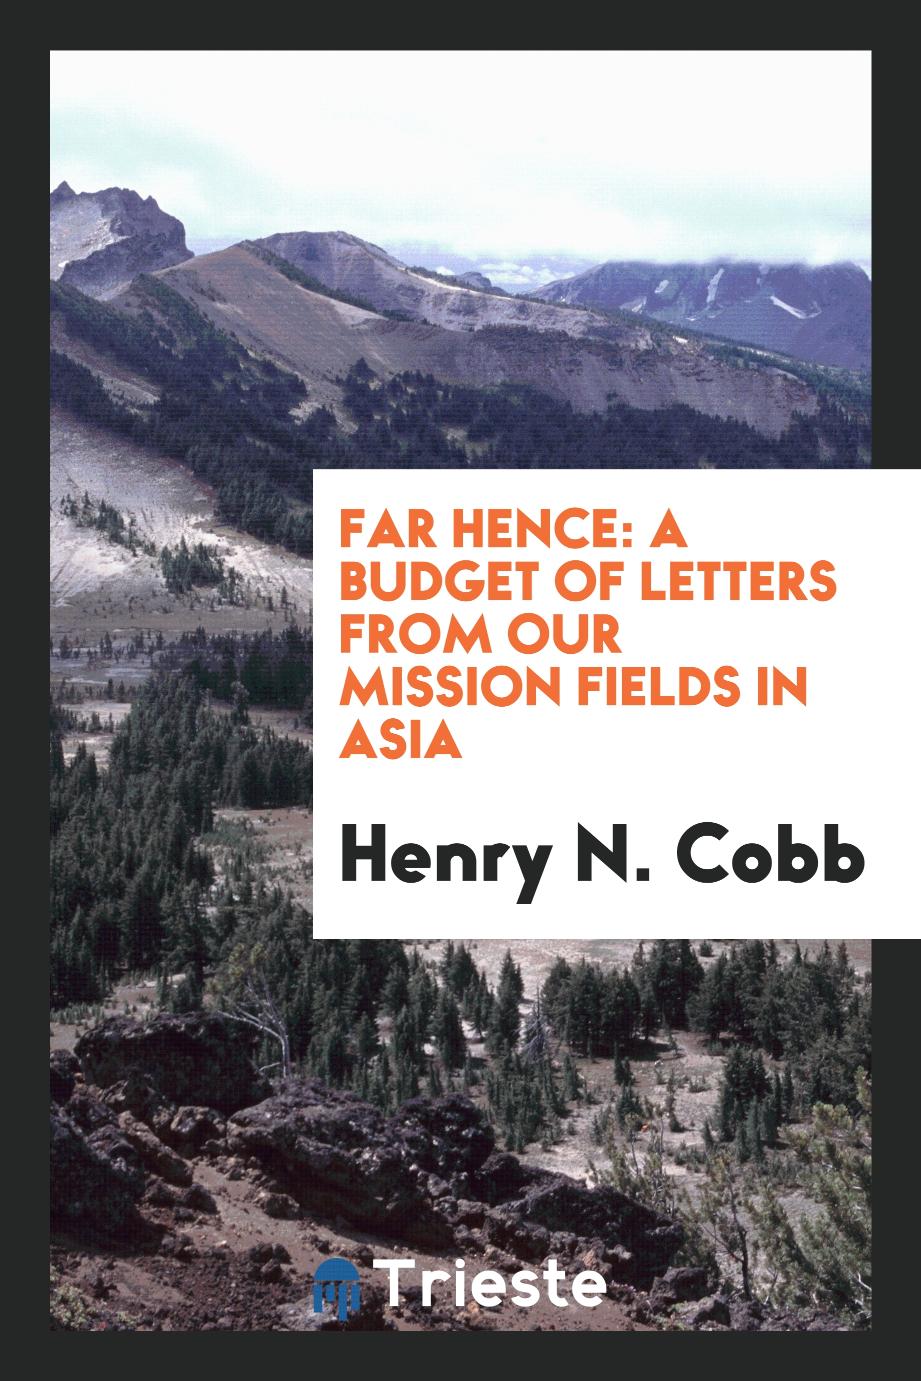 Far hence: a budget of letters from our mission fields in Asia